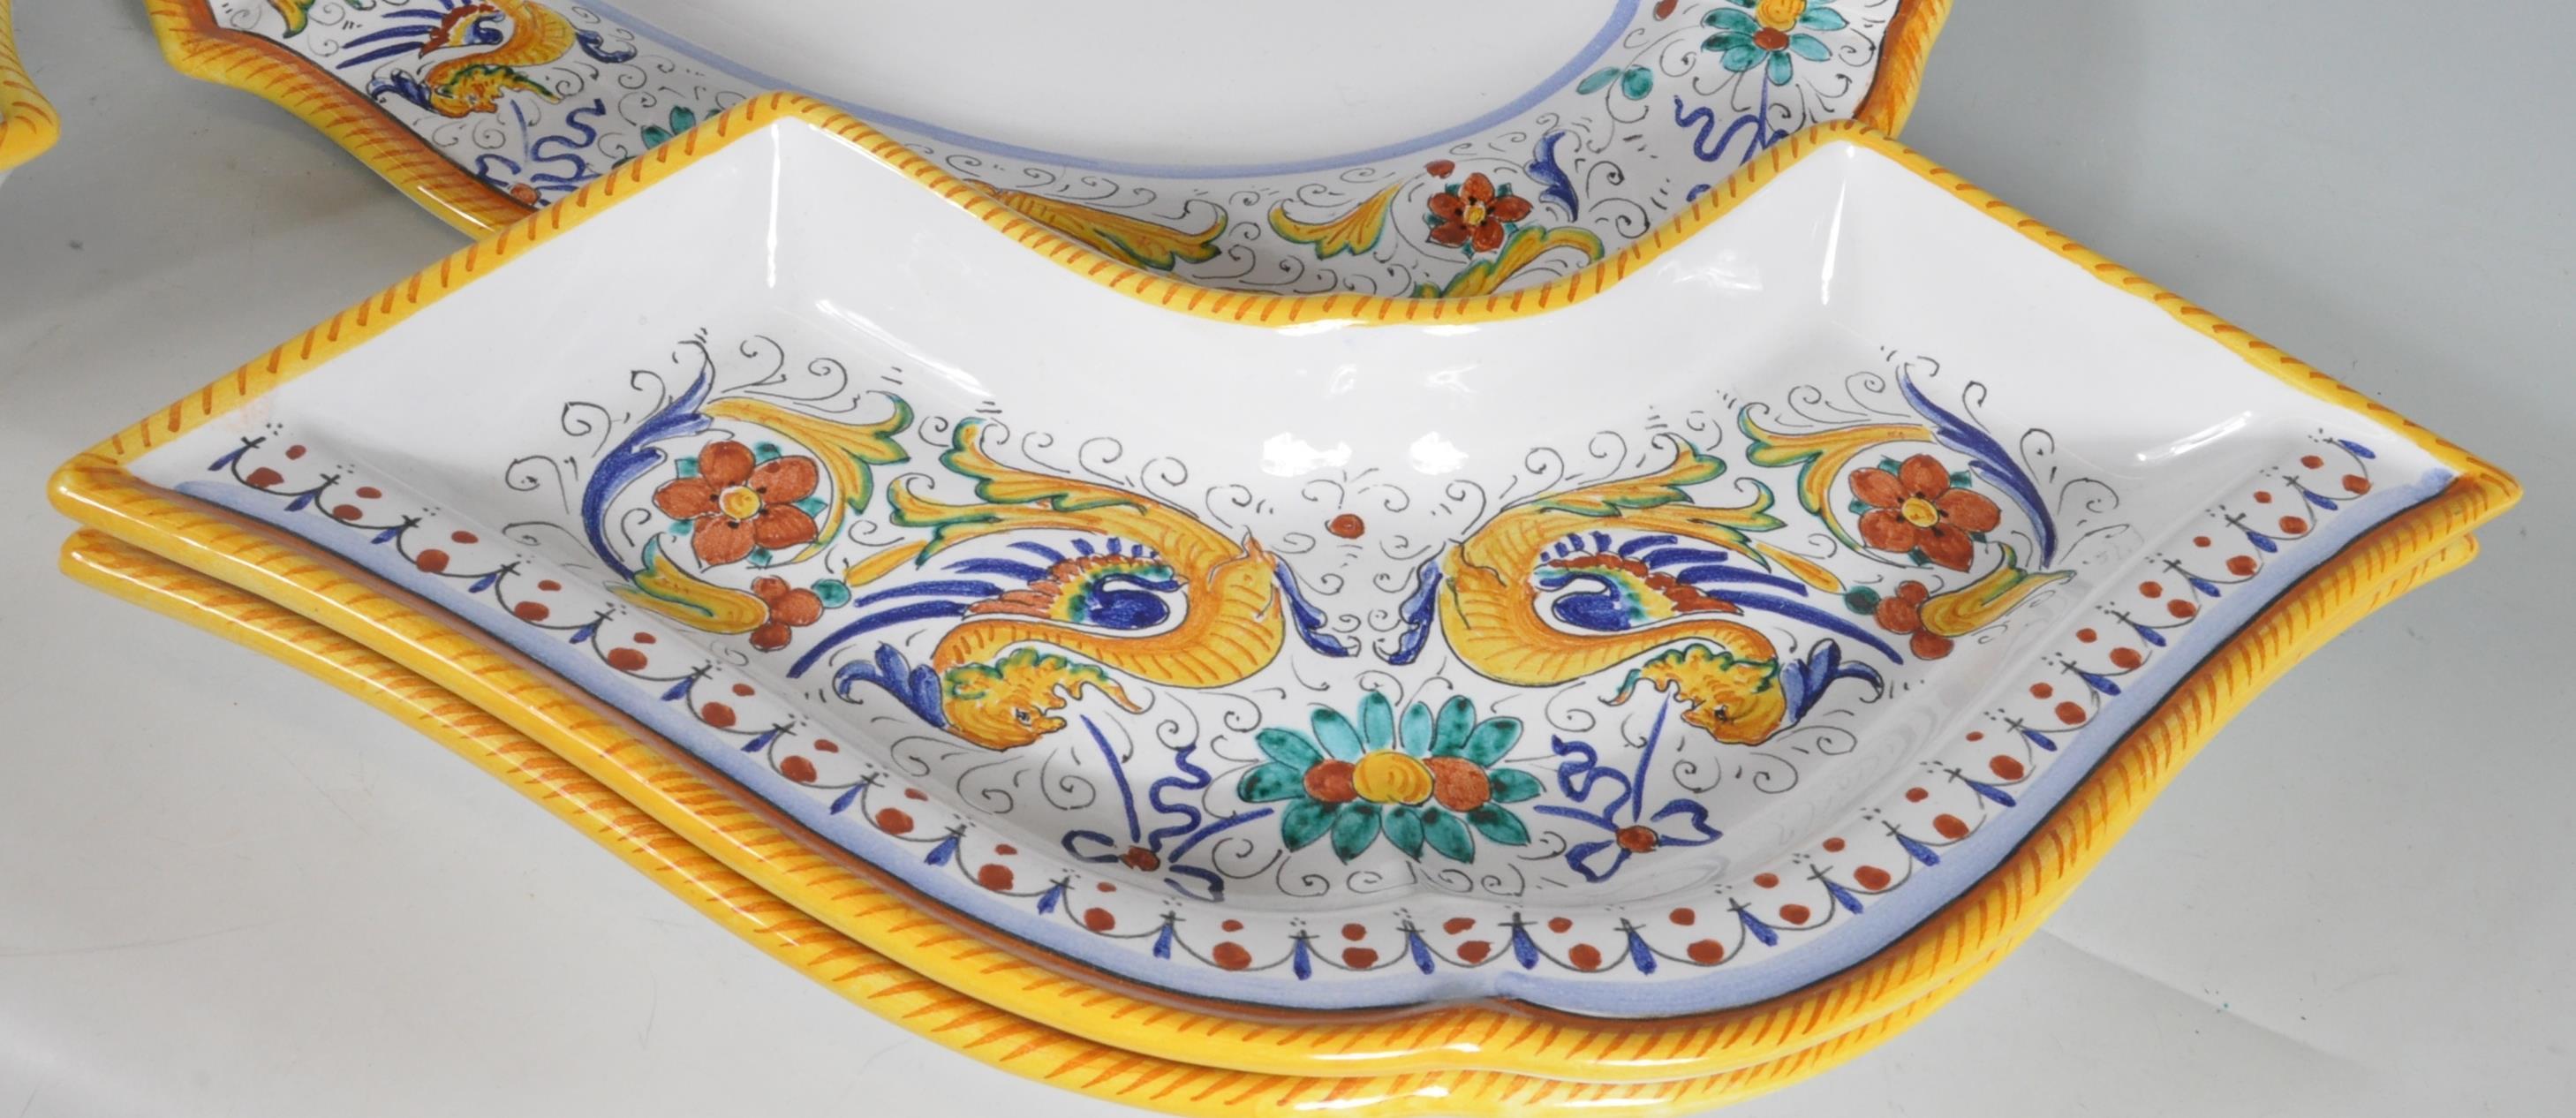 GROUP OF SPANISH FAIENCE SERVING PLATES - Image 2 of 6